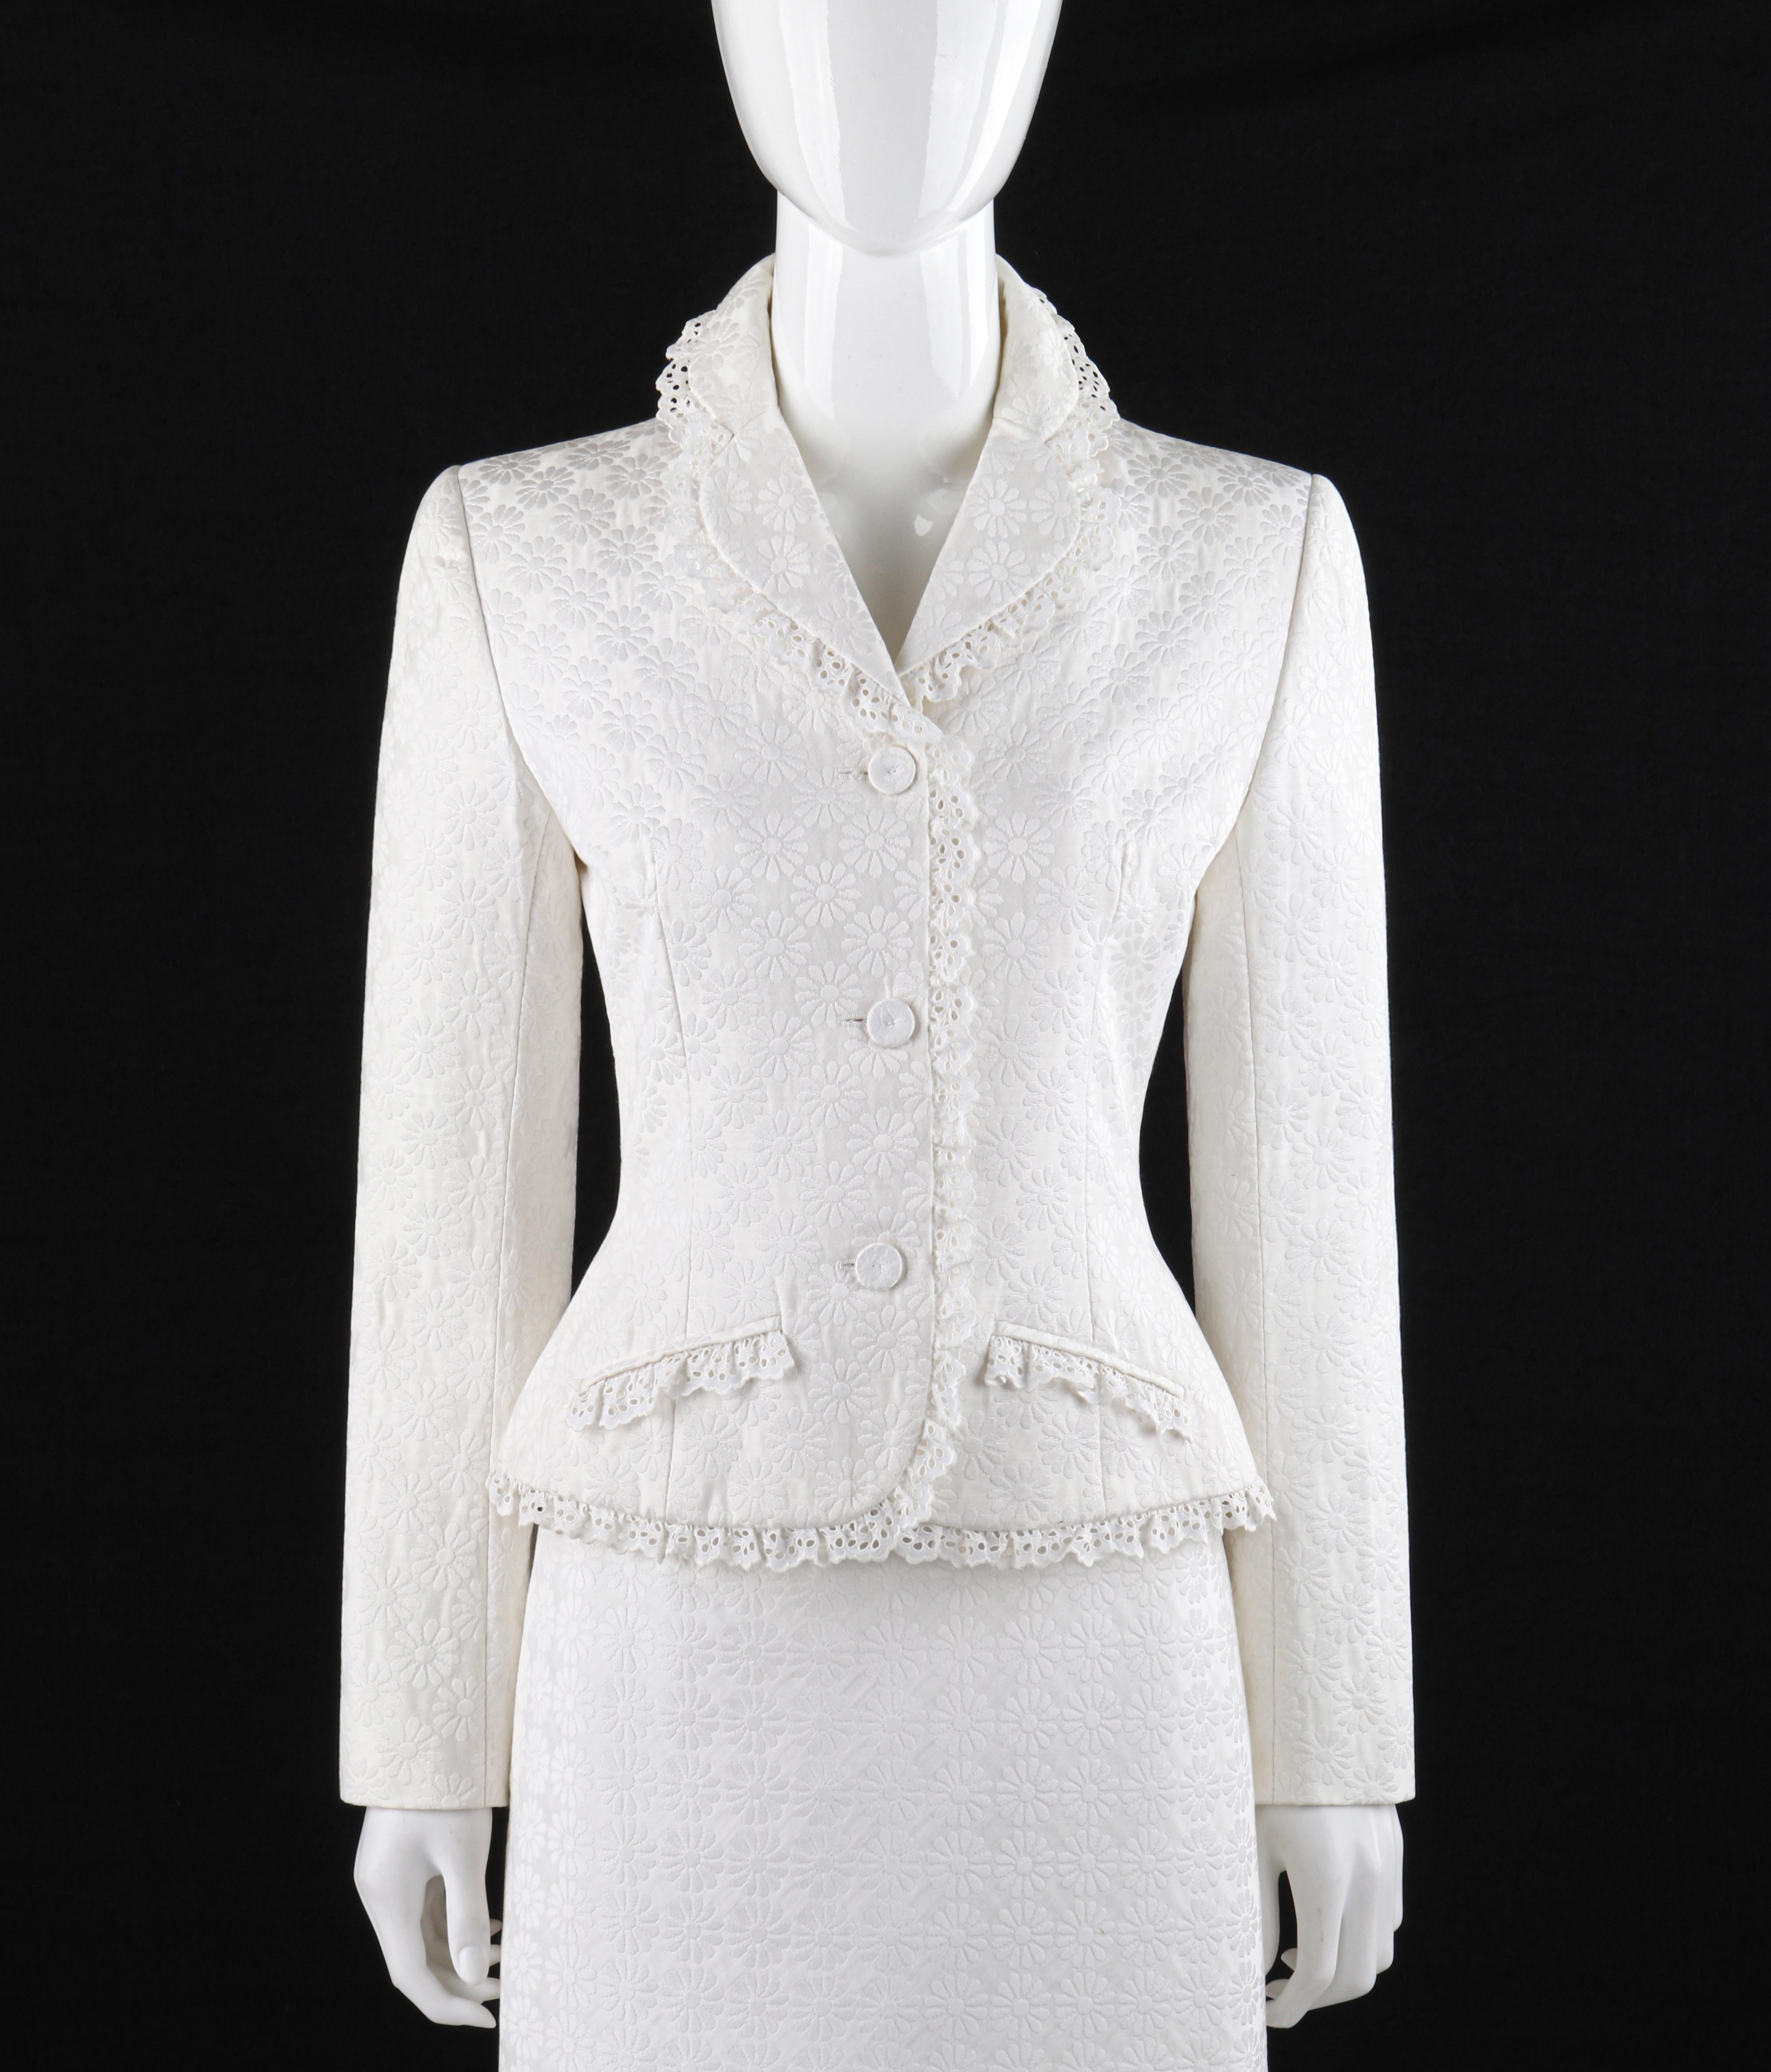 GIVENCHY A/W 1996 JOHN GALLIANO Brocade White Flower Embroidered Lace Trim Skirt Suit
 
Brand / Manufacturer: Givenchy
Collection: A/W 1996
Style: Skirt suit
Color(s): Shades of white/ivory
Lined: Yes
Marked Fabric Content: “98% cotton, 2% other